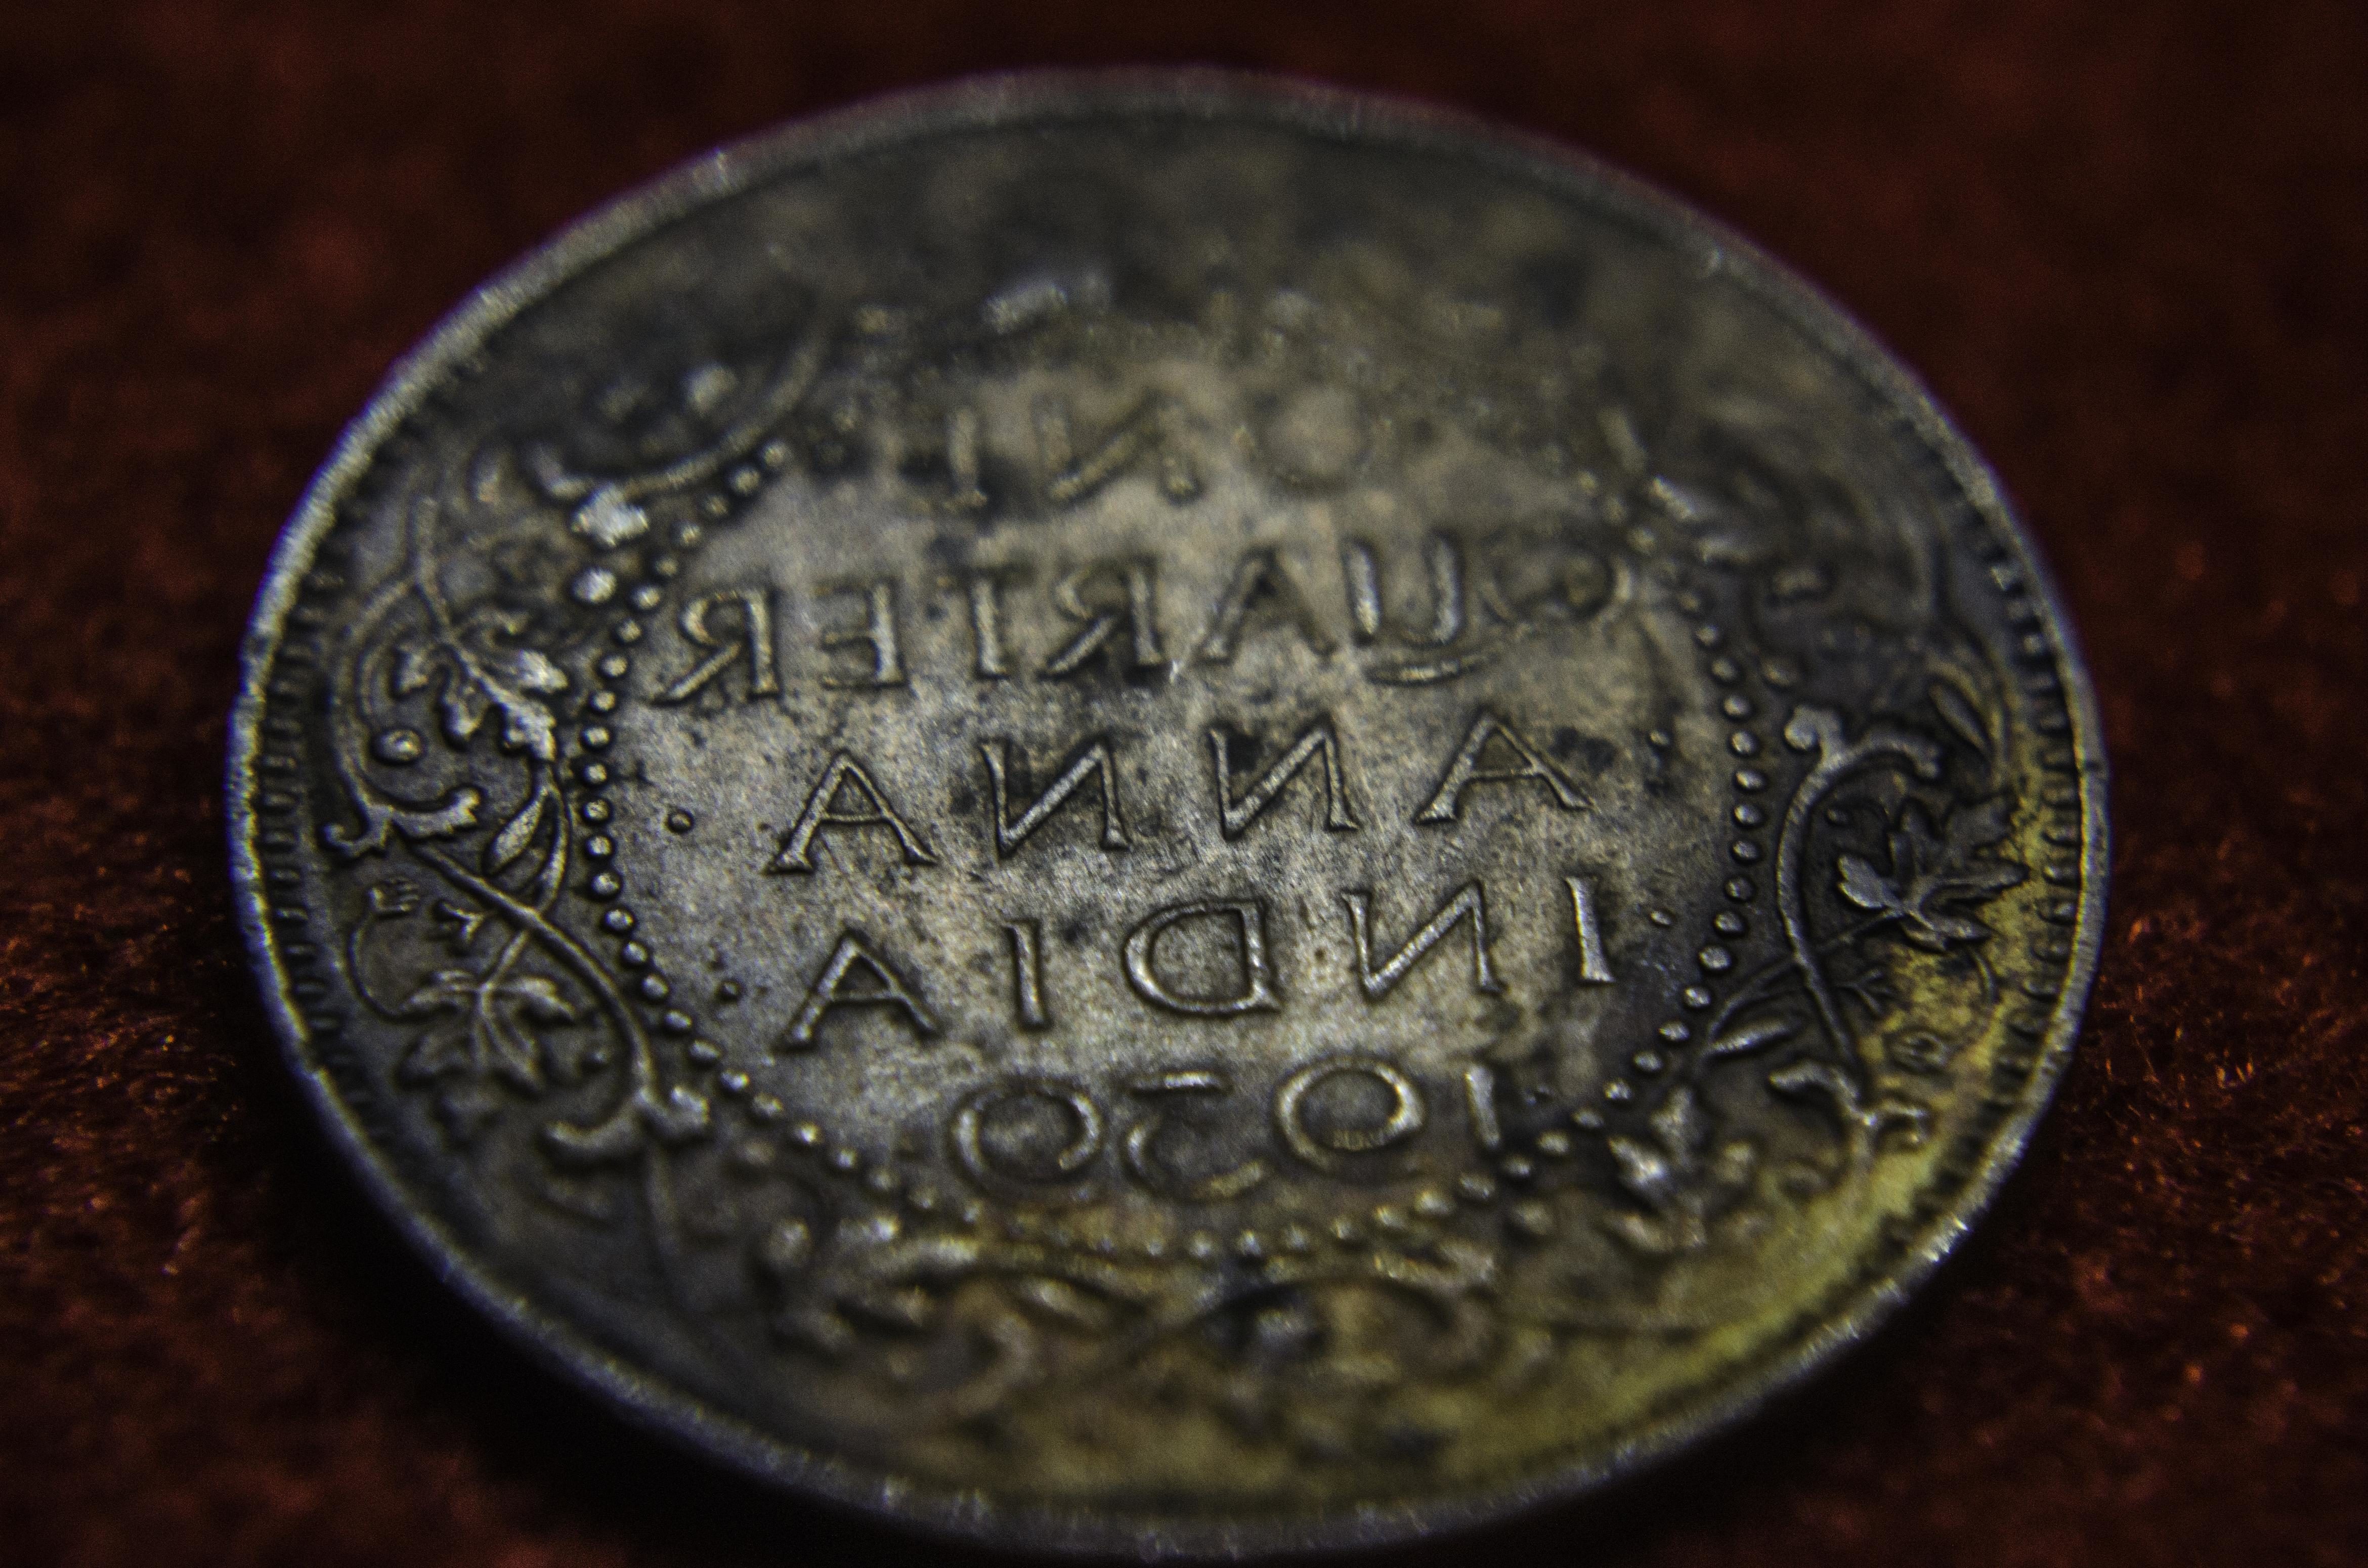 Free picture: old, antique, metal coin, money, symbol